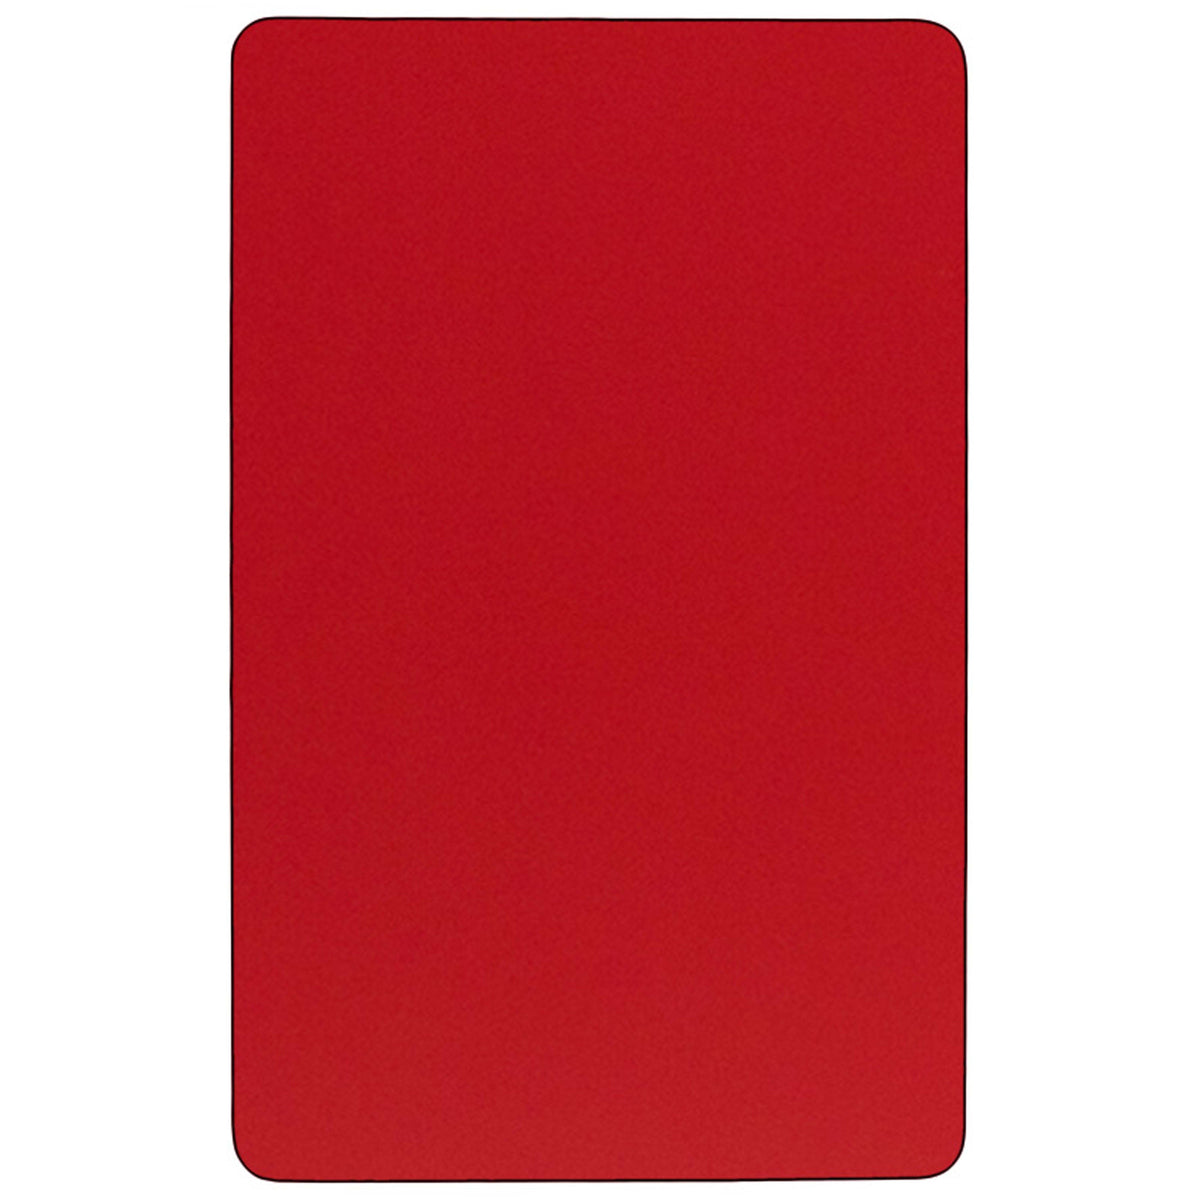 Red |#| Mobile 30inchW x 60inchL Rectangular Red HP Laminate Adjustable Activity Table